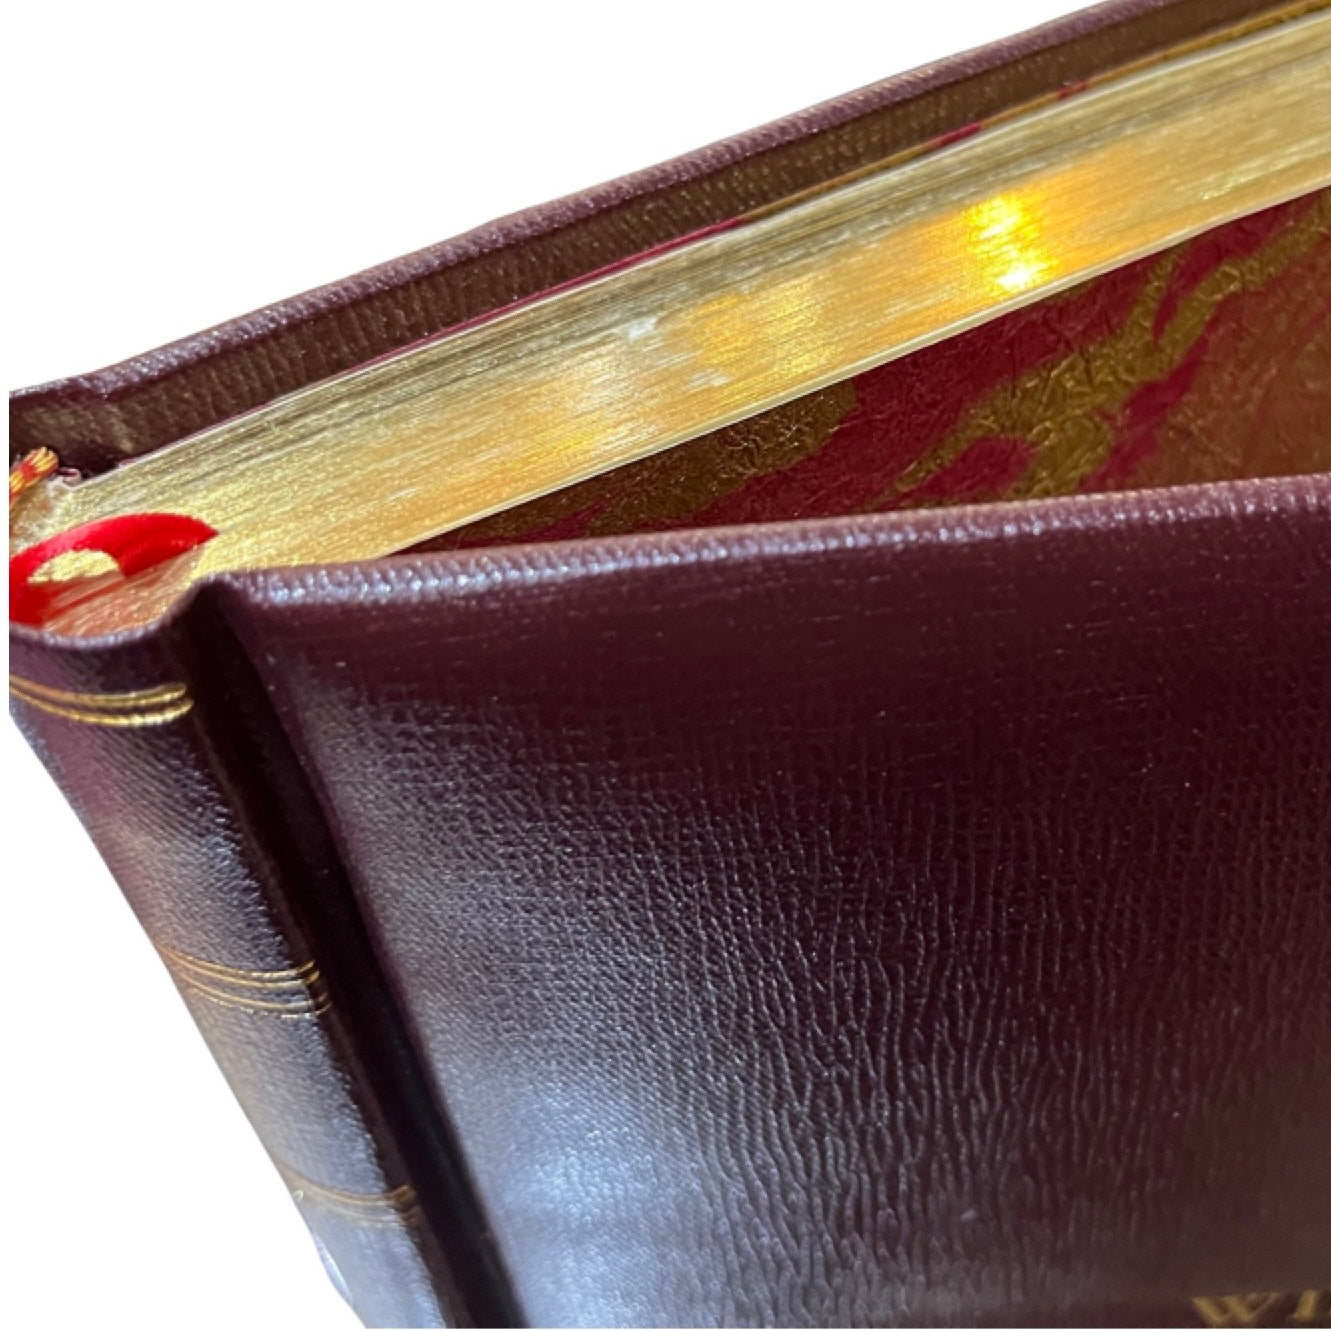 Wine Cellar Book | Johnson's Leather Wine Cellar Book | Leather Bound with Gilt Edges | Gold Personalization